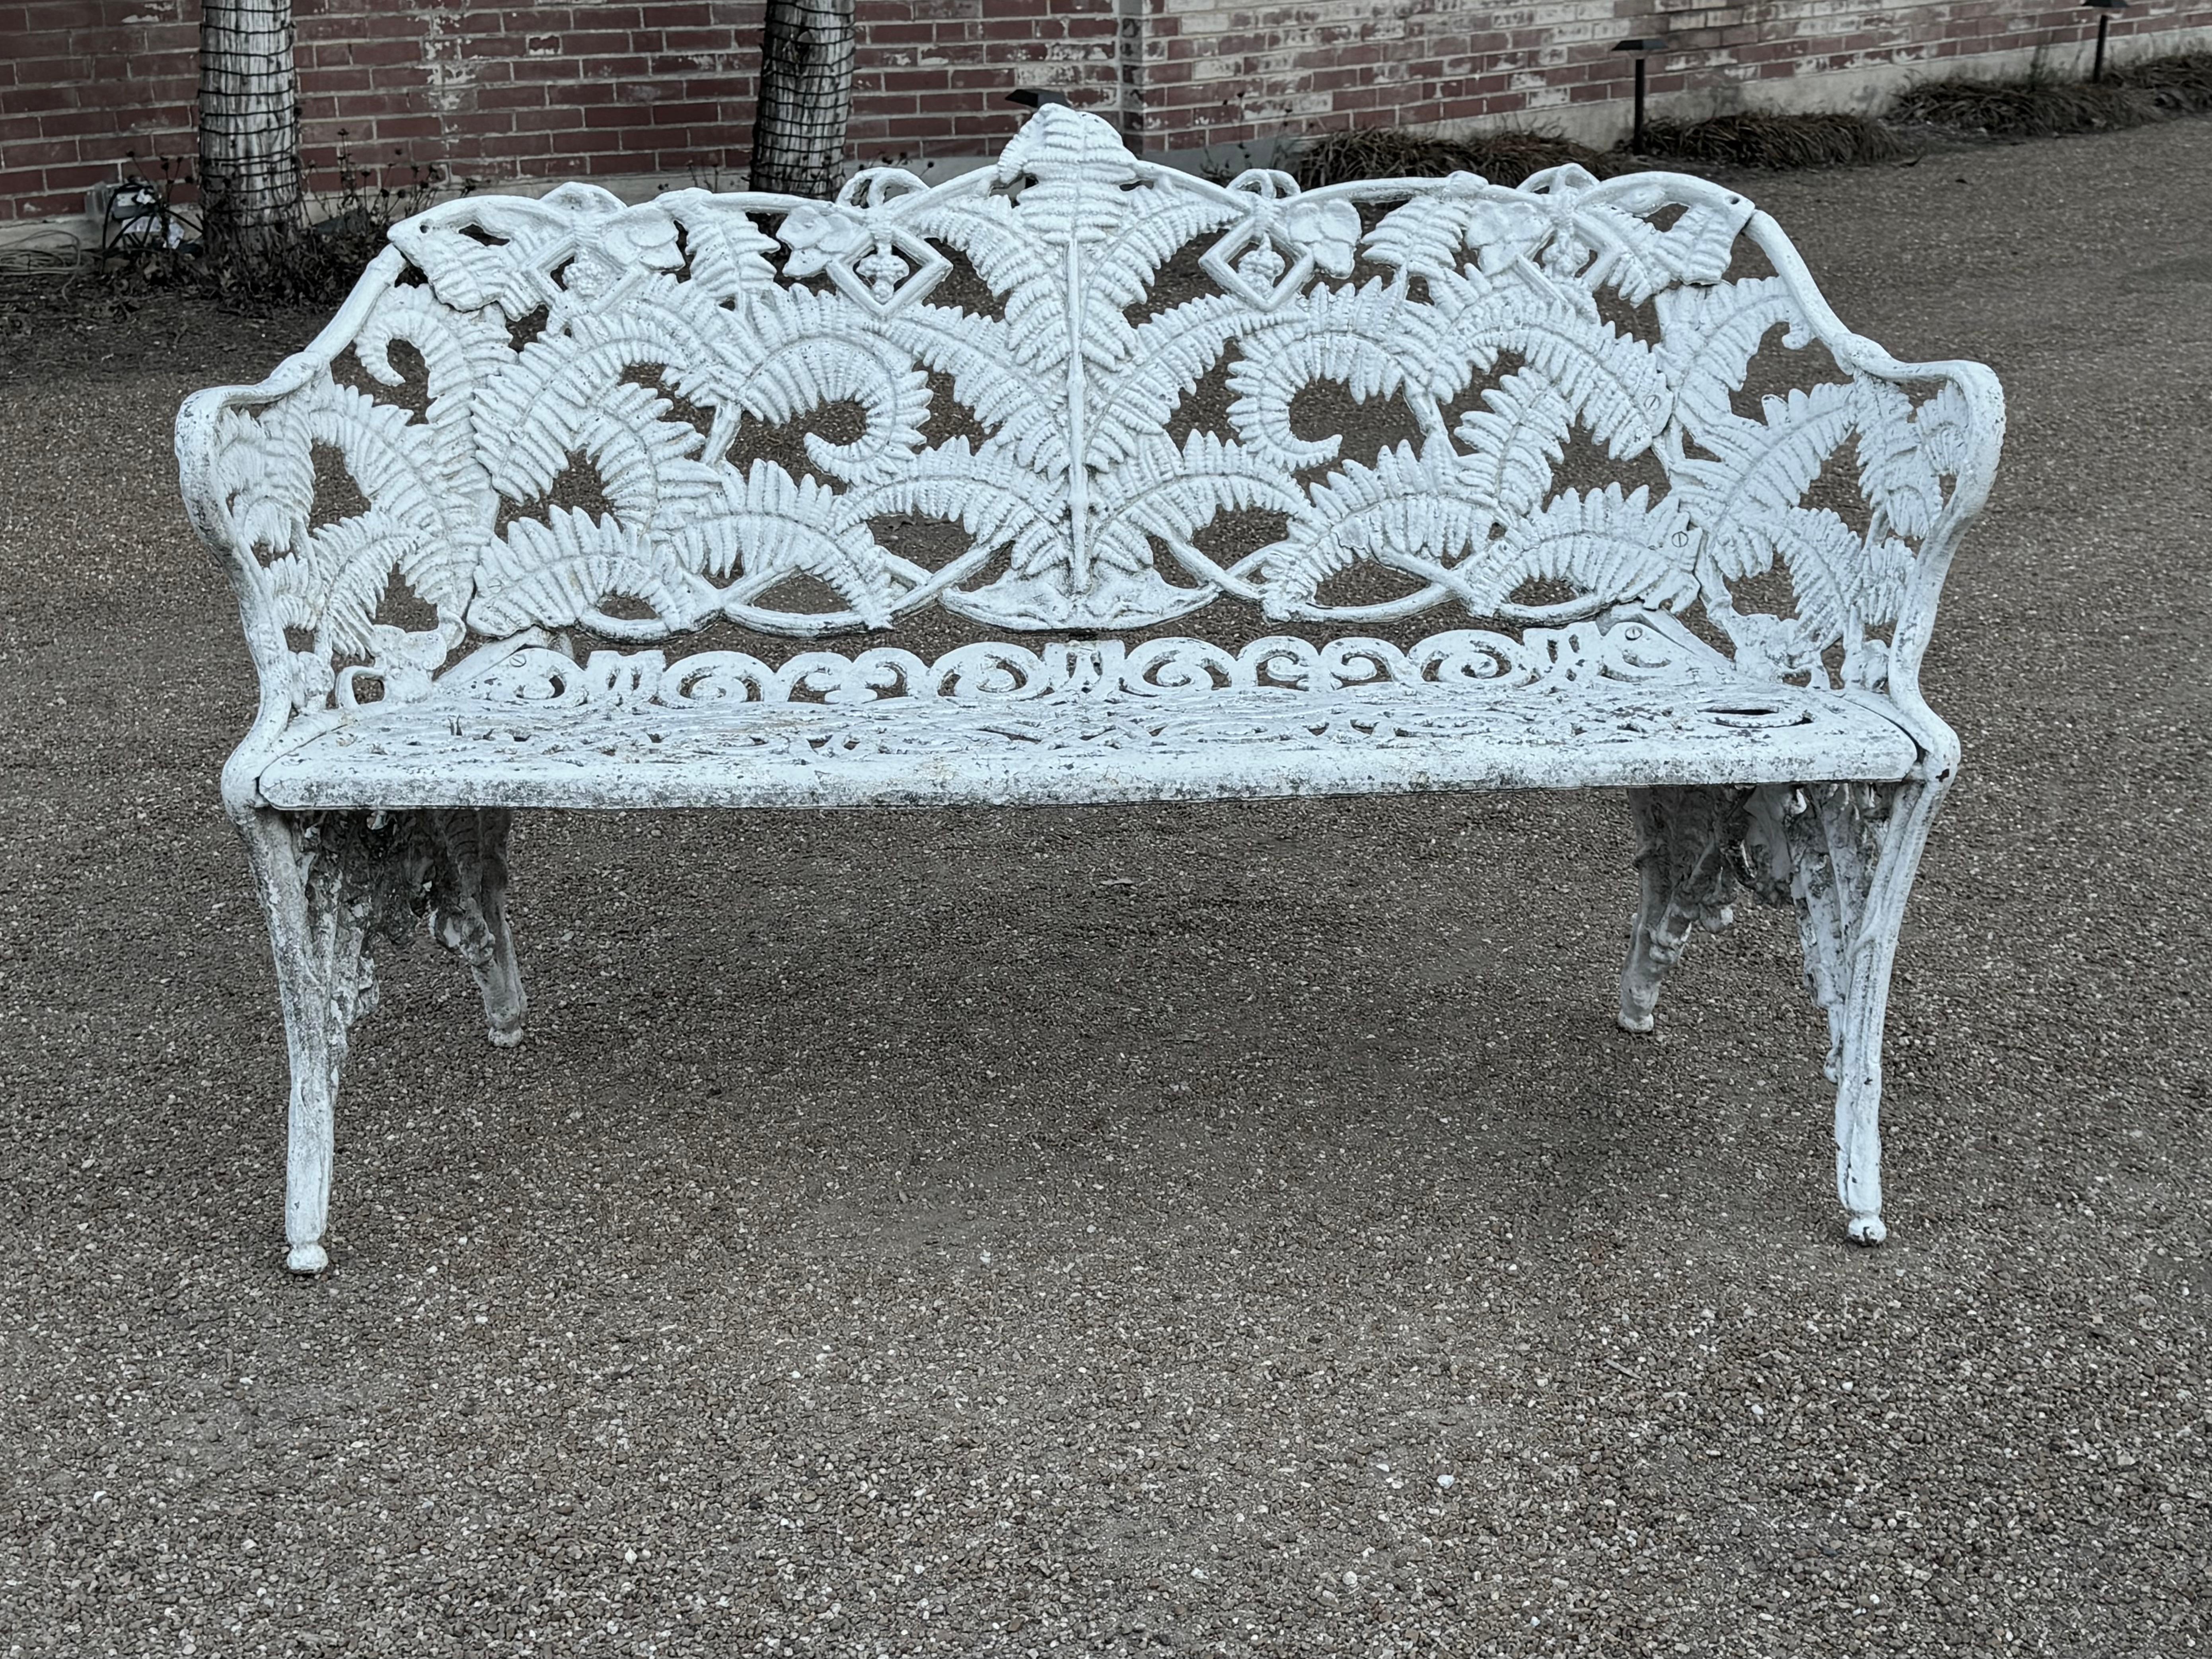 Antique very heavy cast iron Victorian English Style garden bench painted white having the Fern & Blackberry pattern. From an old St.Louis estate with Architectural pedigree, paint shows age and soil, can be blasted and repainted for additional